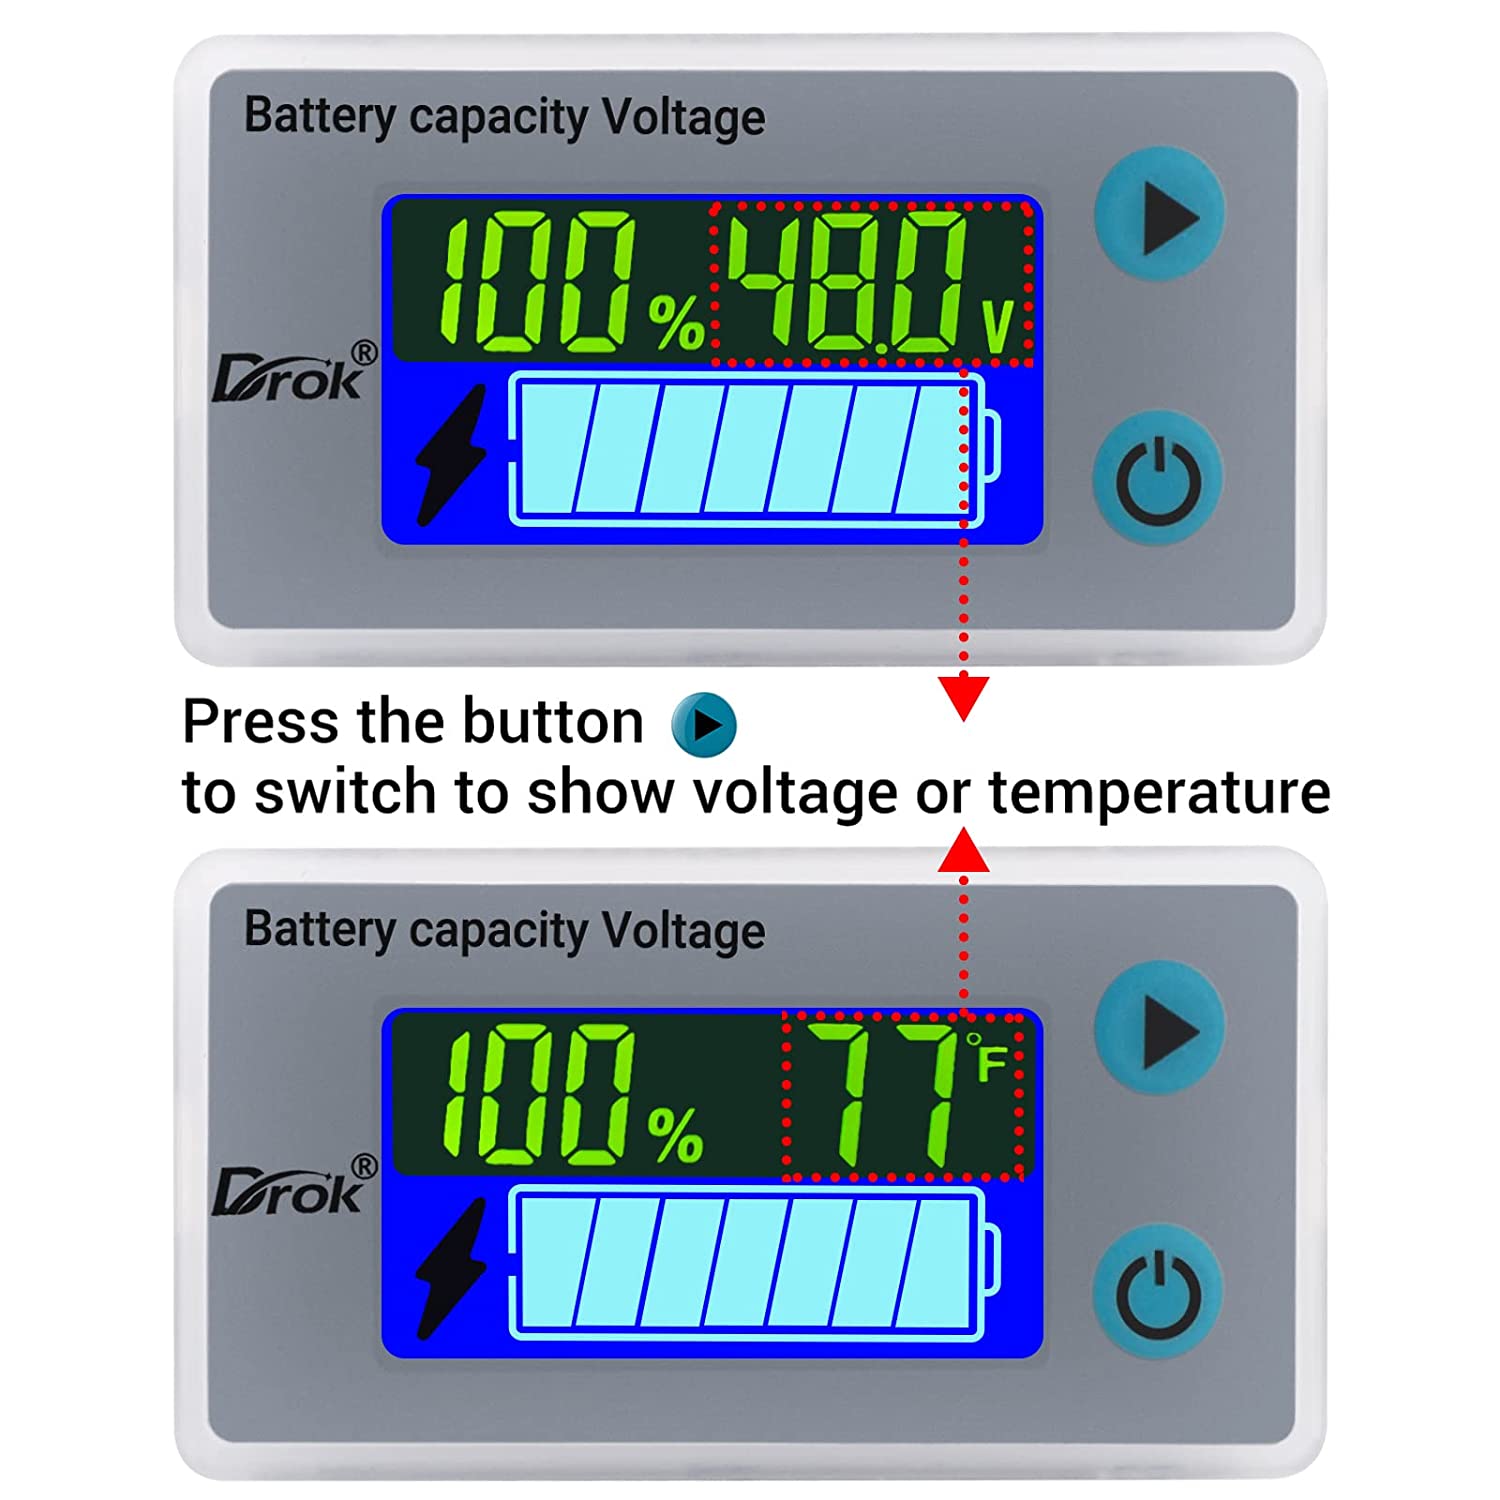 Battery capacity voltage